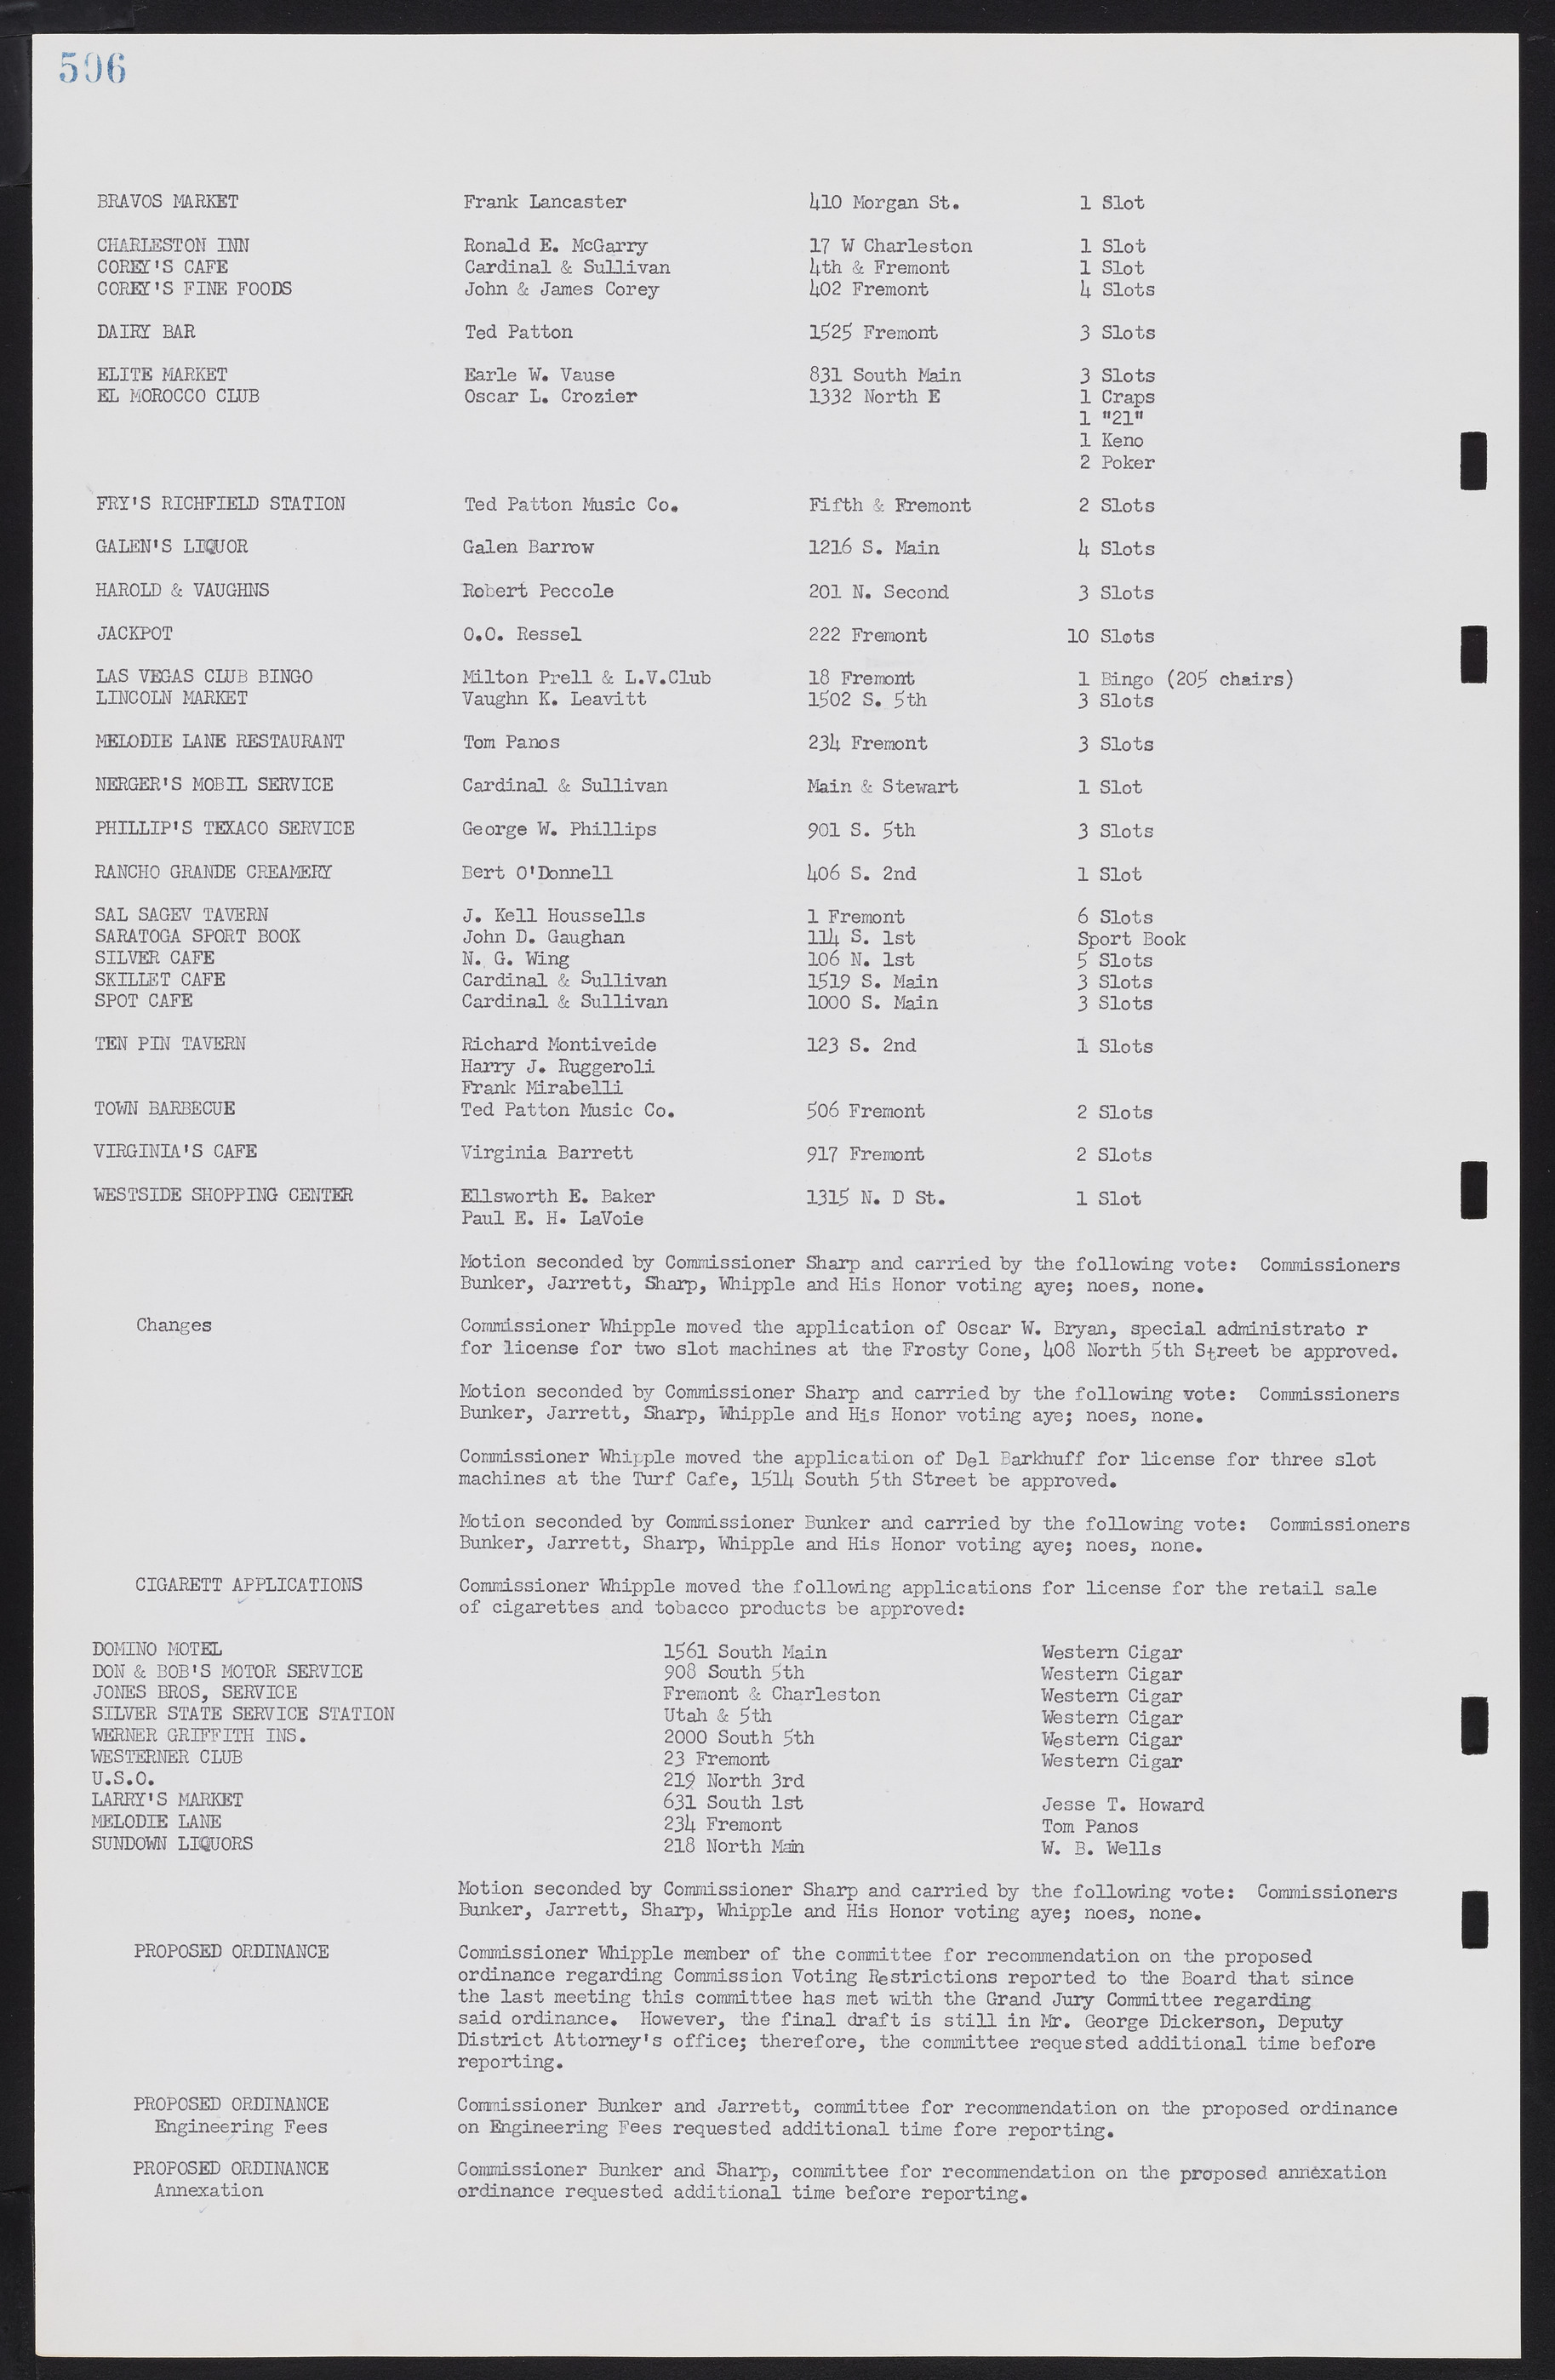 Las Vegas City Commission Minutes, May 26, 1952 to February 17, 1954, lvc000008-536